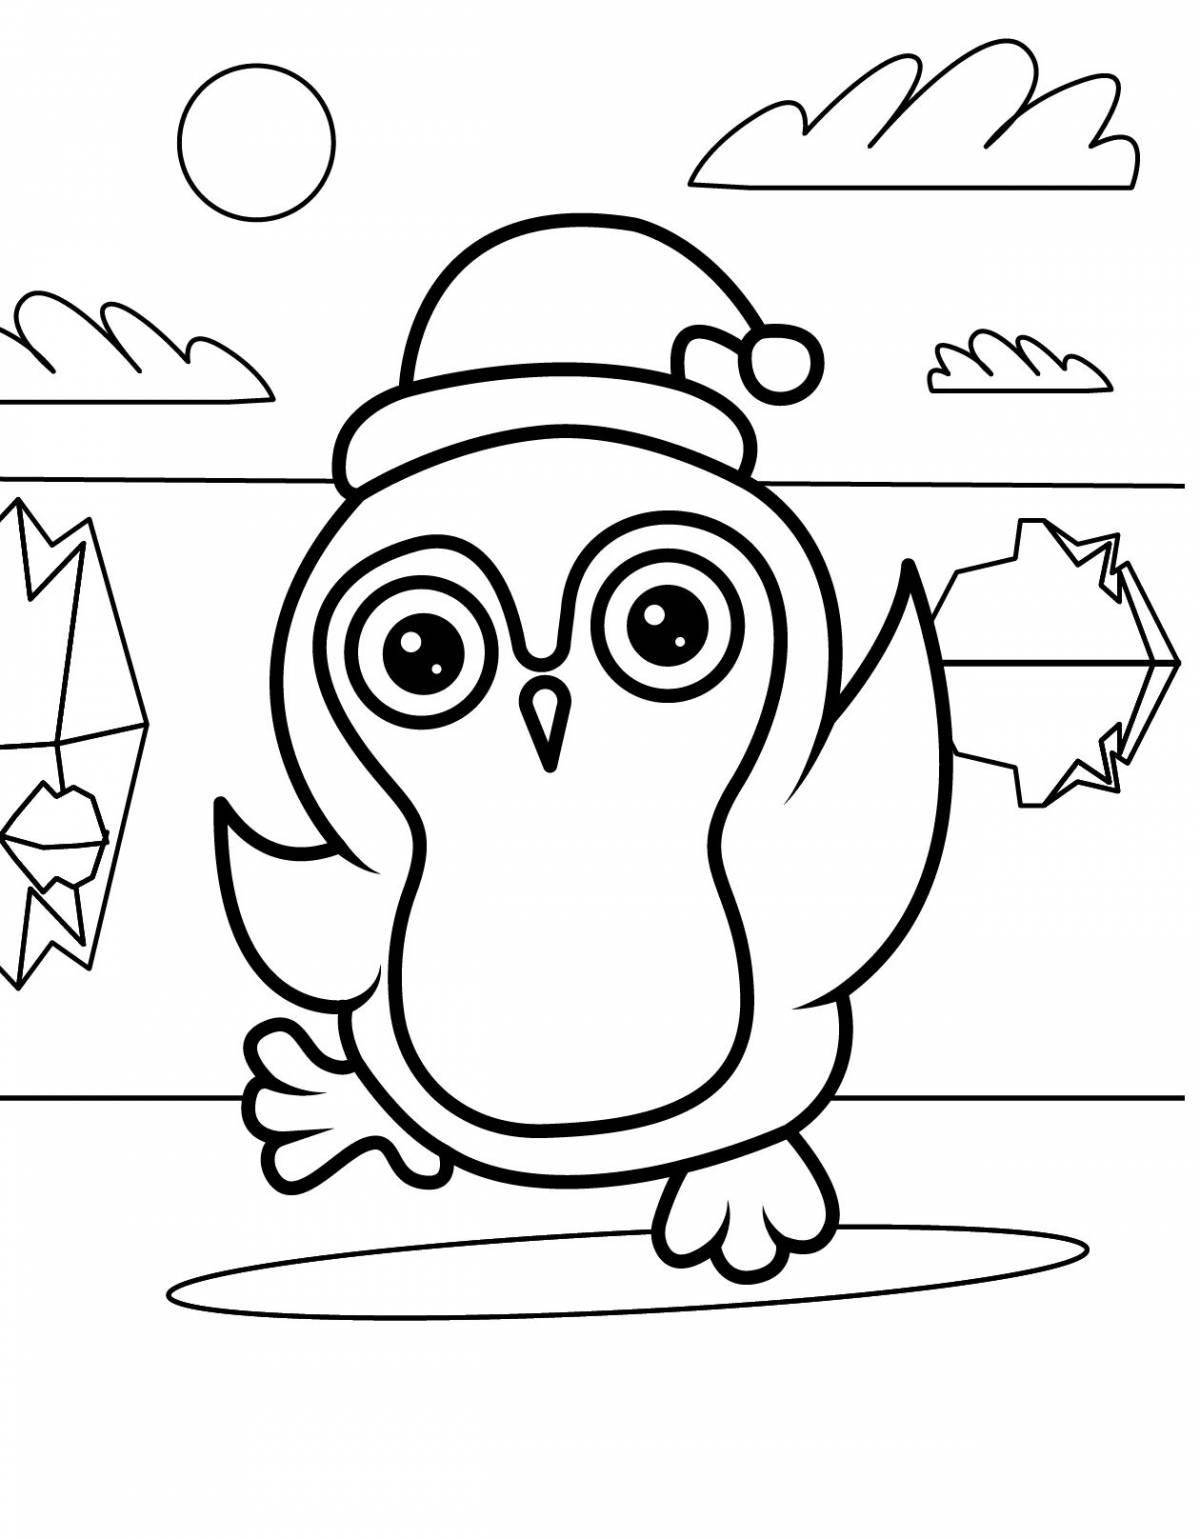 Cute and playful penguin coloring book